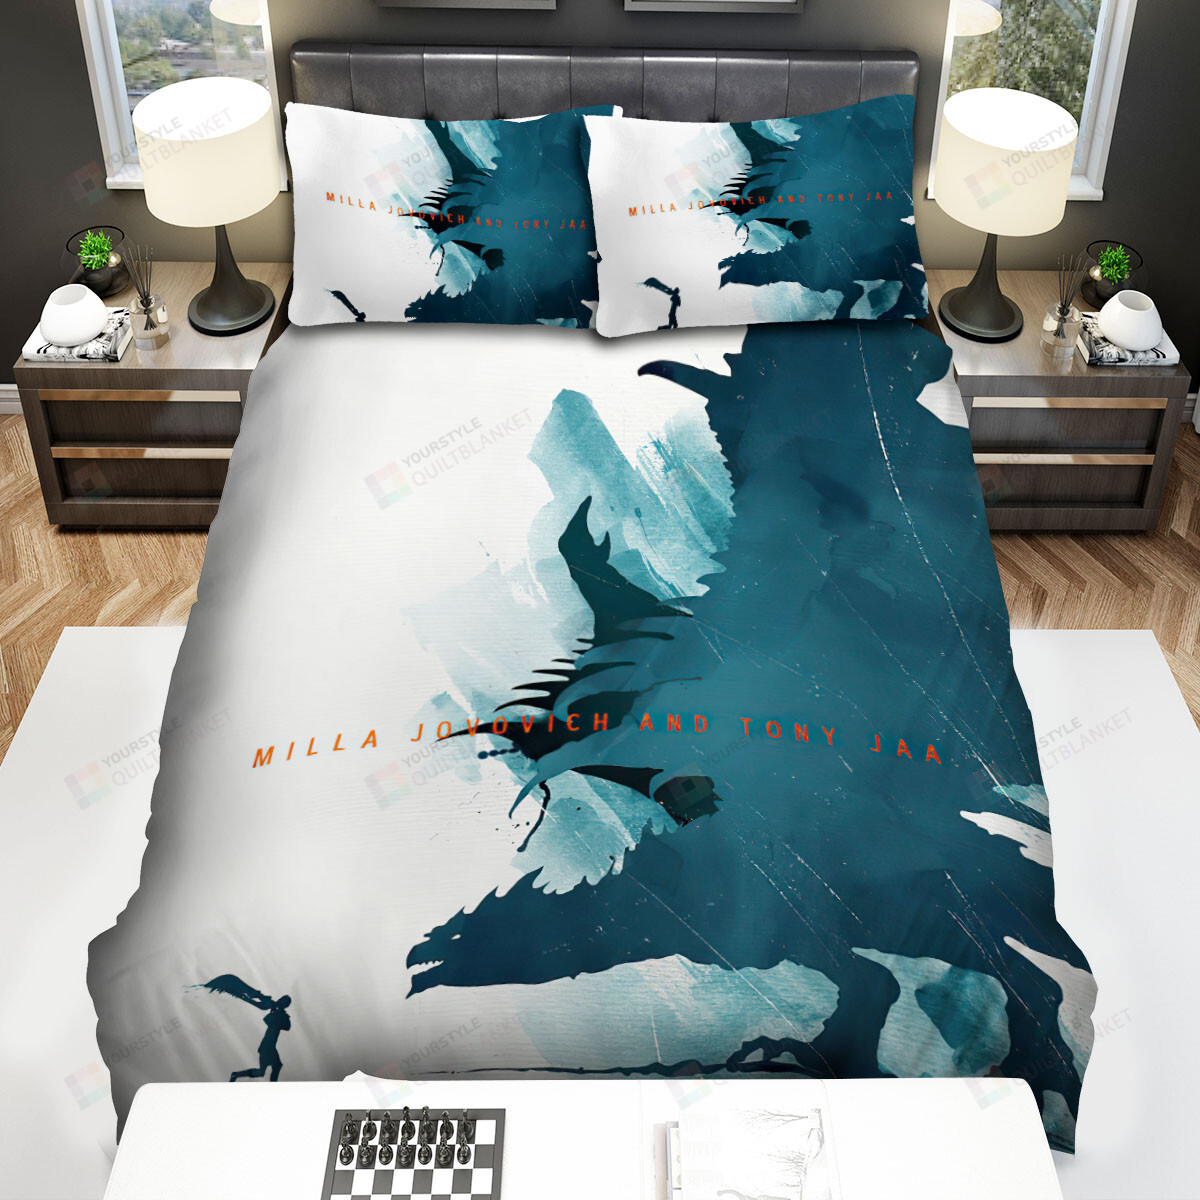 Monster Hunter (I) Milla Jovovich And Tony Jaa Movie Poster Bed Sheets Spread Comforter Duvet Cover Bedding Sets